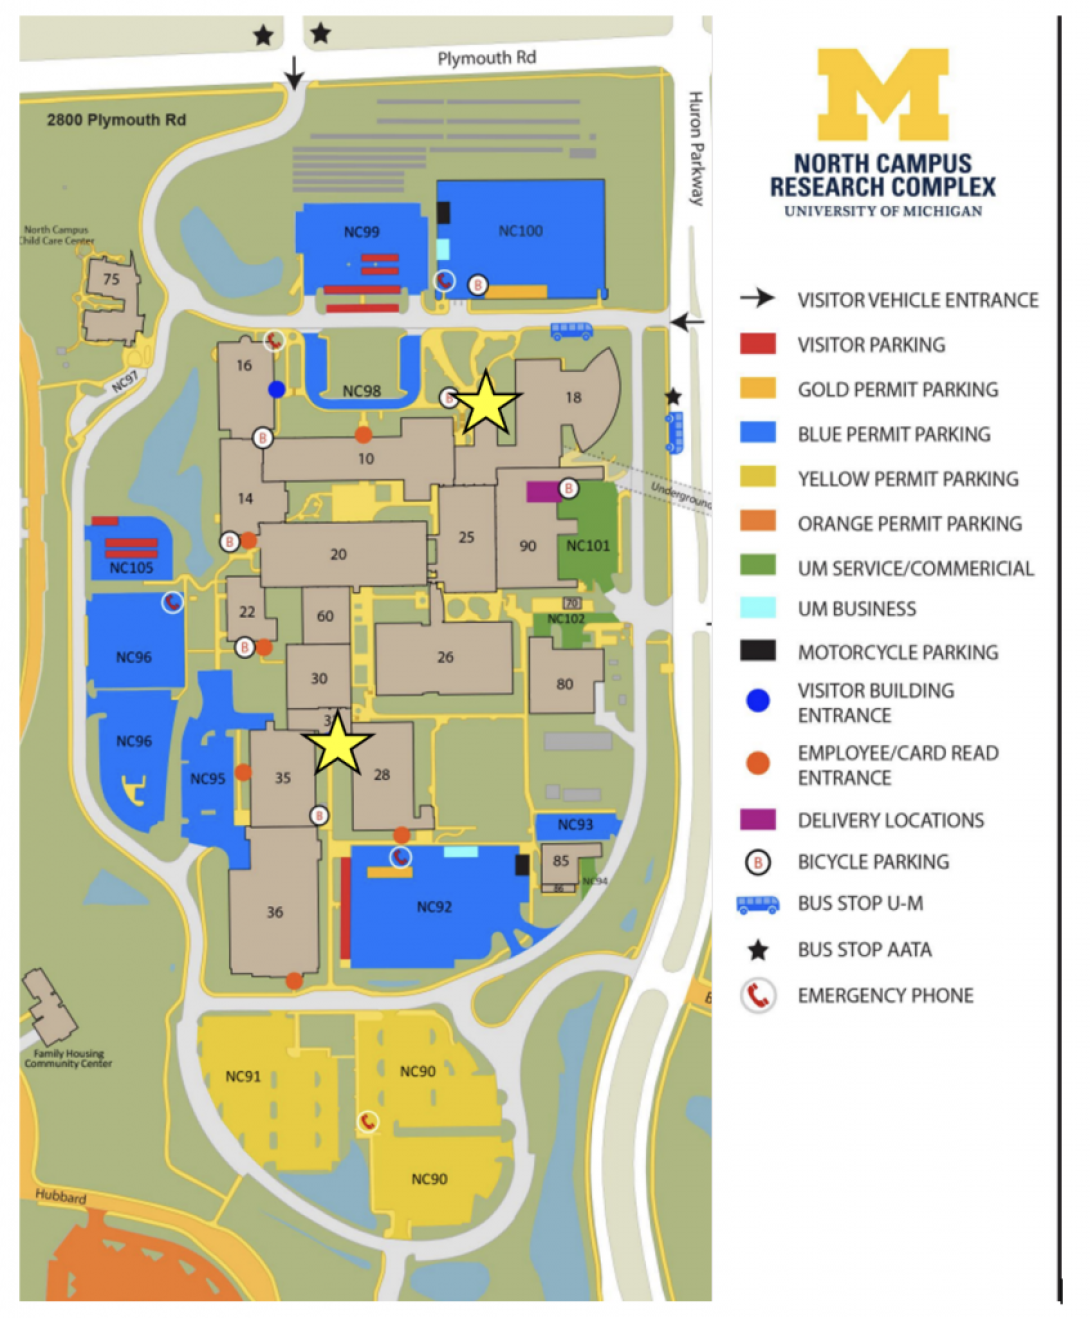 map of NCRC campus labeled with instructions to AGC